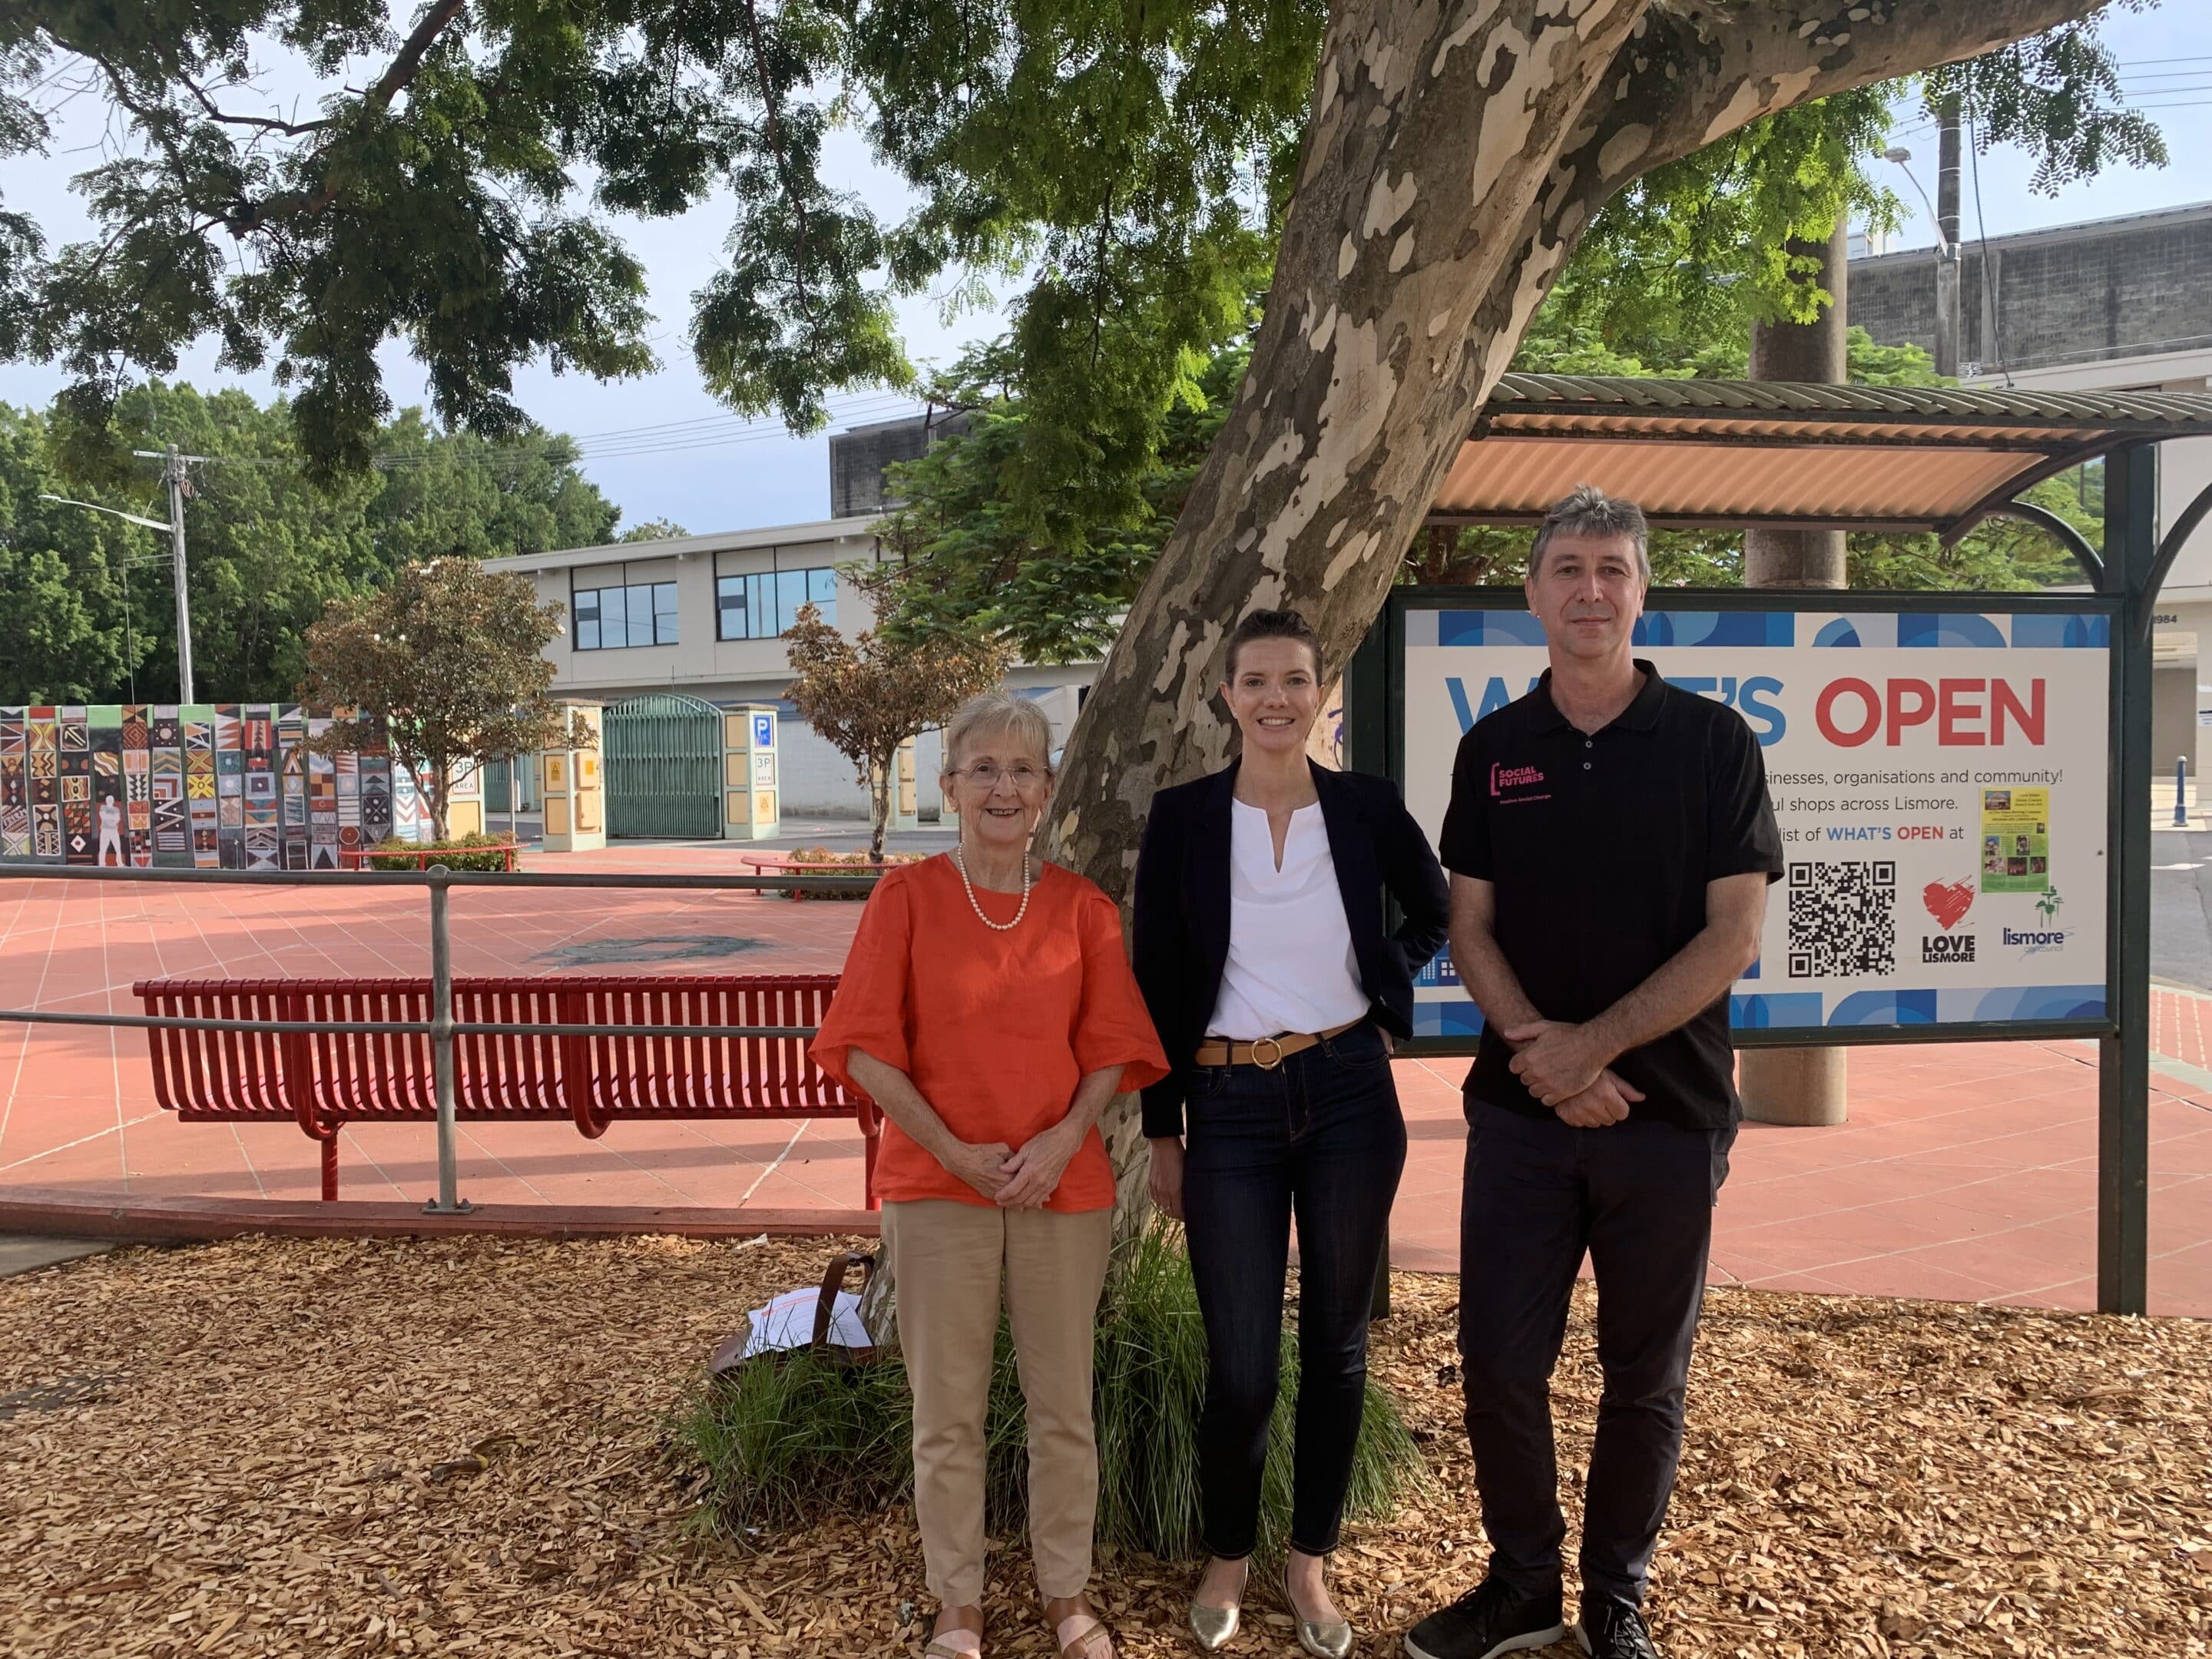 Social Futures Ceo Tony Davies Met With The Nsw Shadow Minister For Housing And Homelessness Rose Jackson, And Member For Lismore, Janelle Saffin